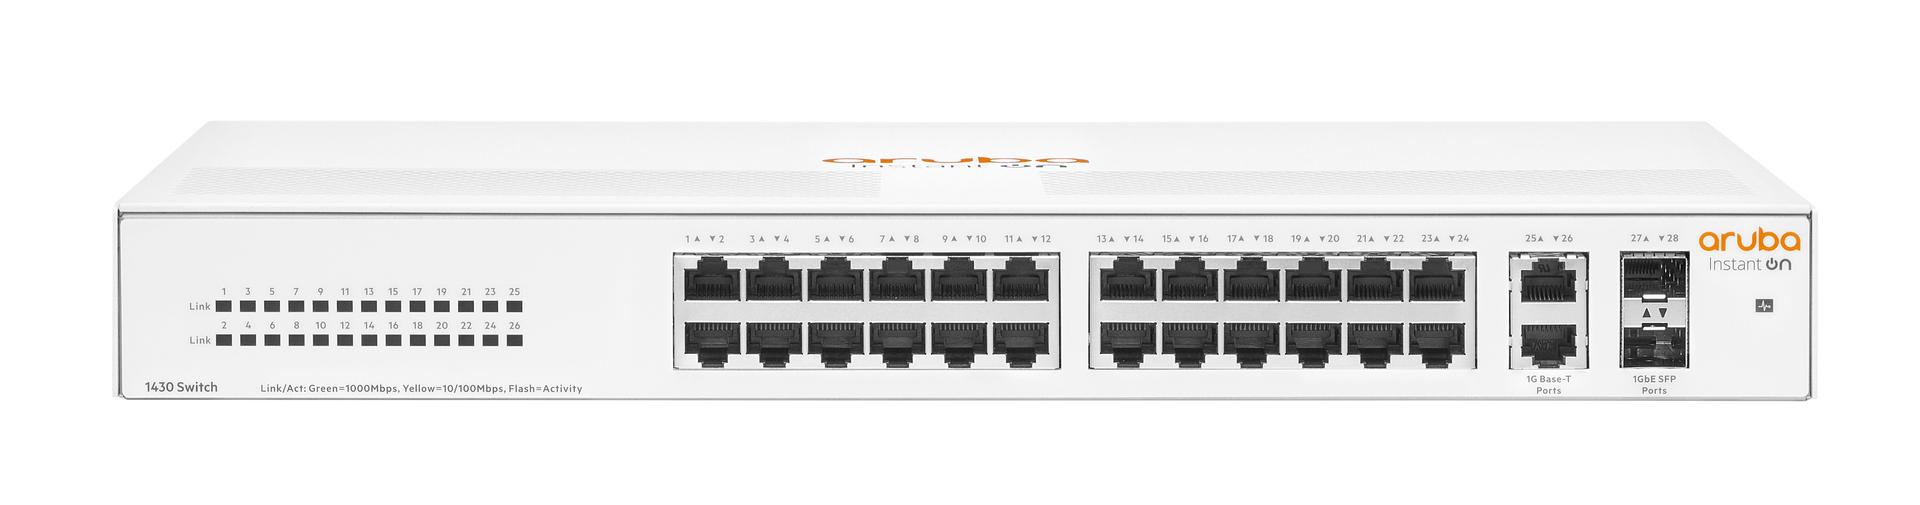 Aruba Instant On 1430 26-Port Switch R8R50A Front Image